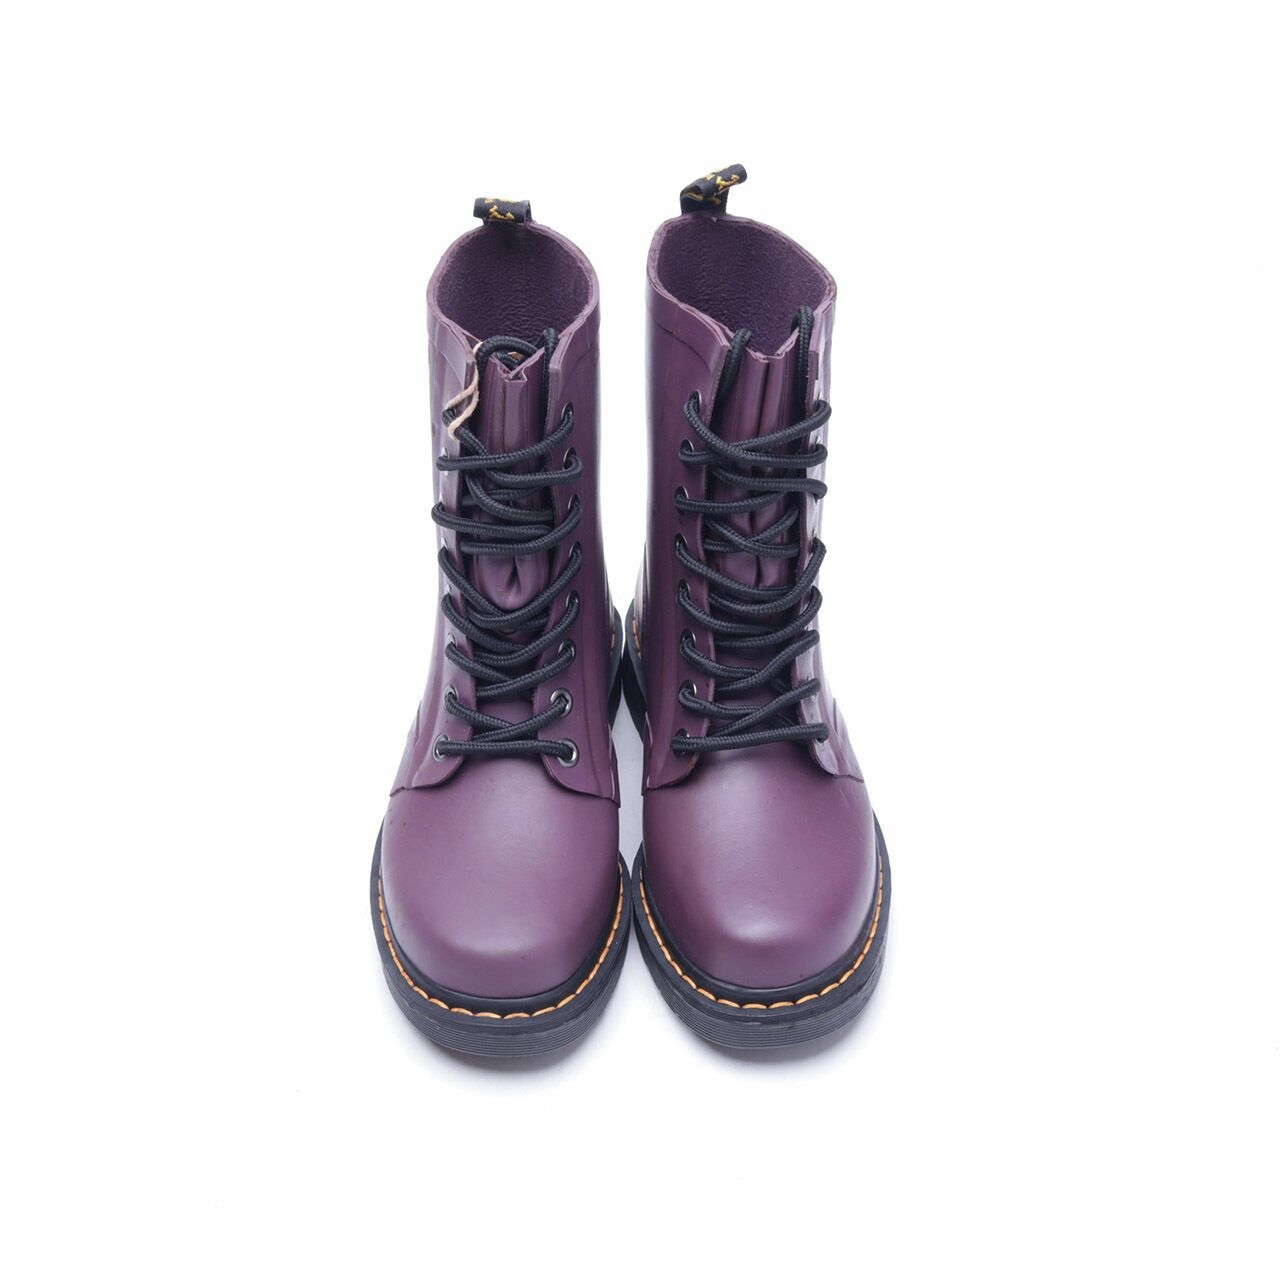 DRMARTENS Wine Boots